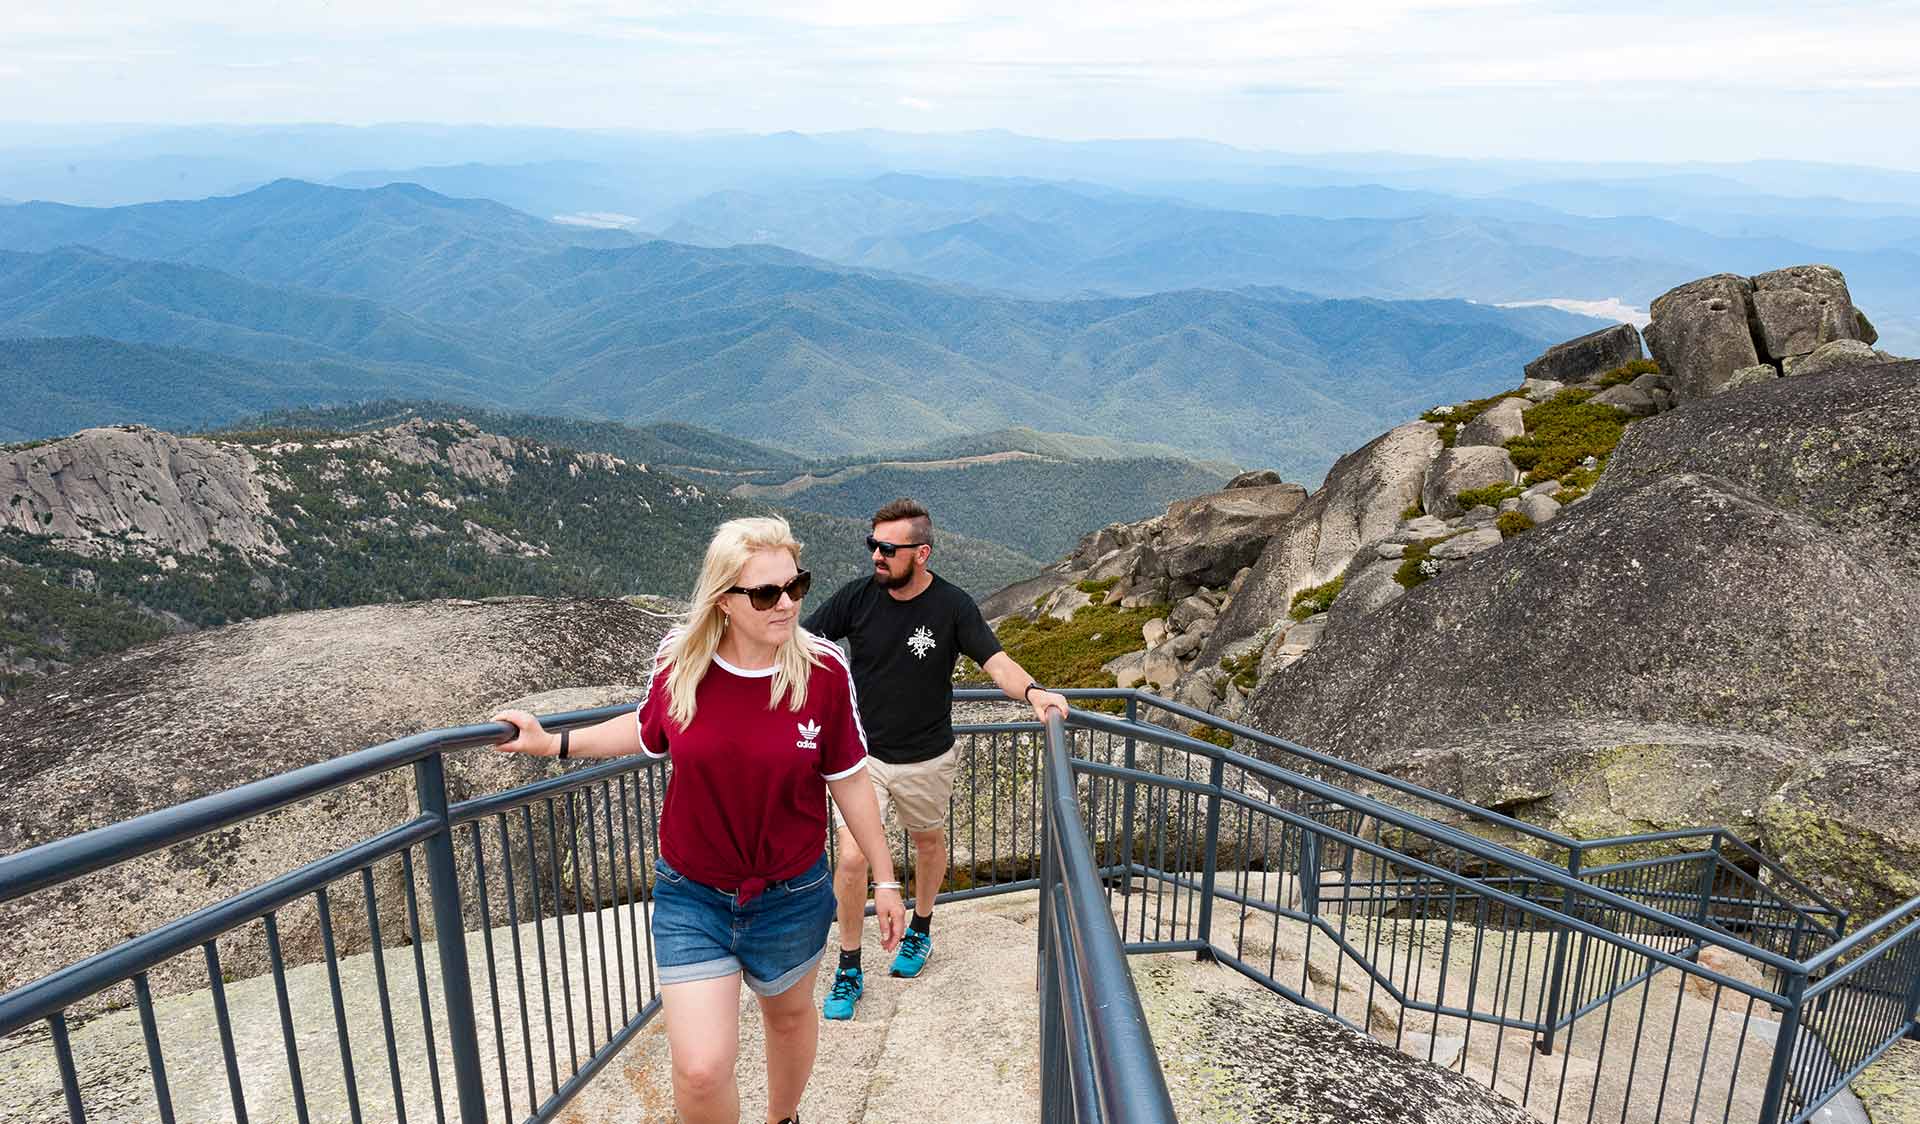 A couple in their thirties approach the summit lookout at the Horn of Mount Buffalo.